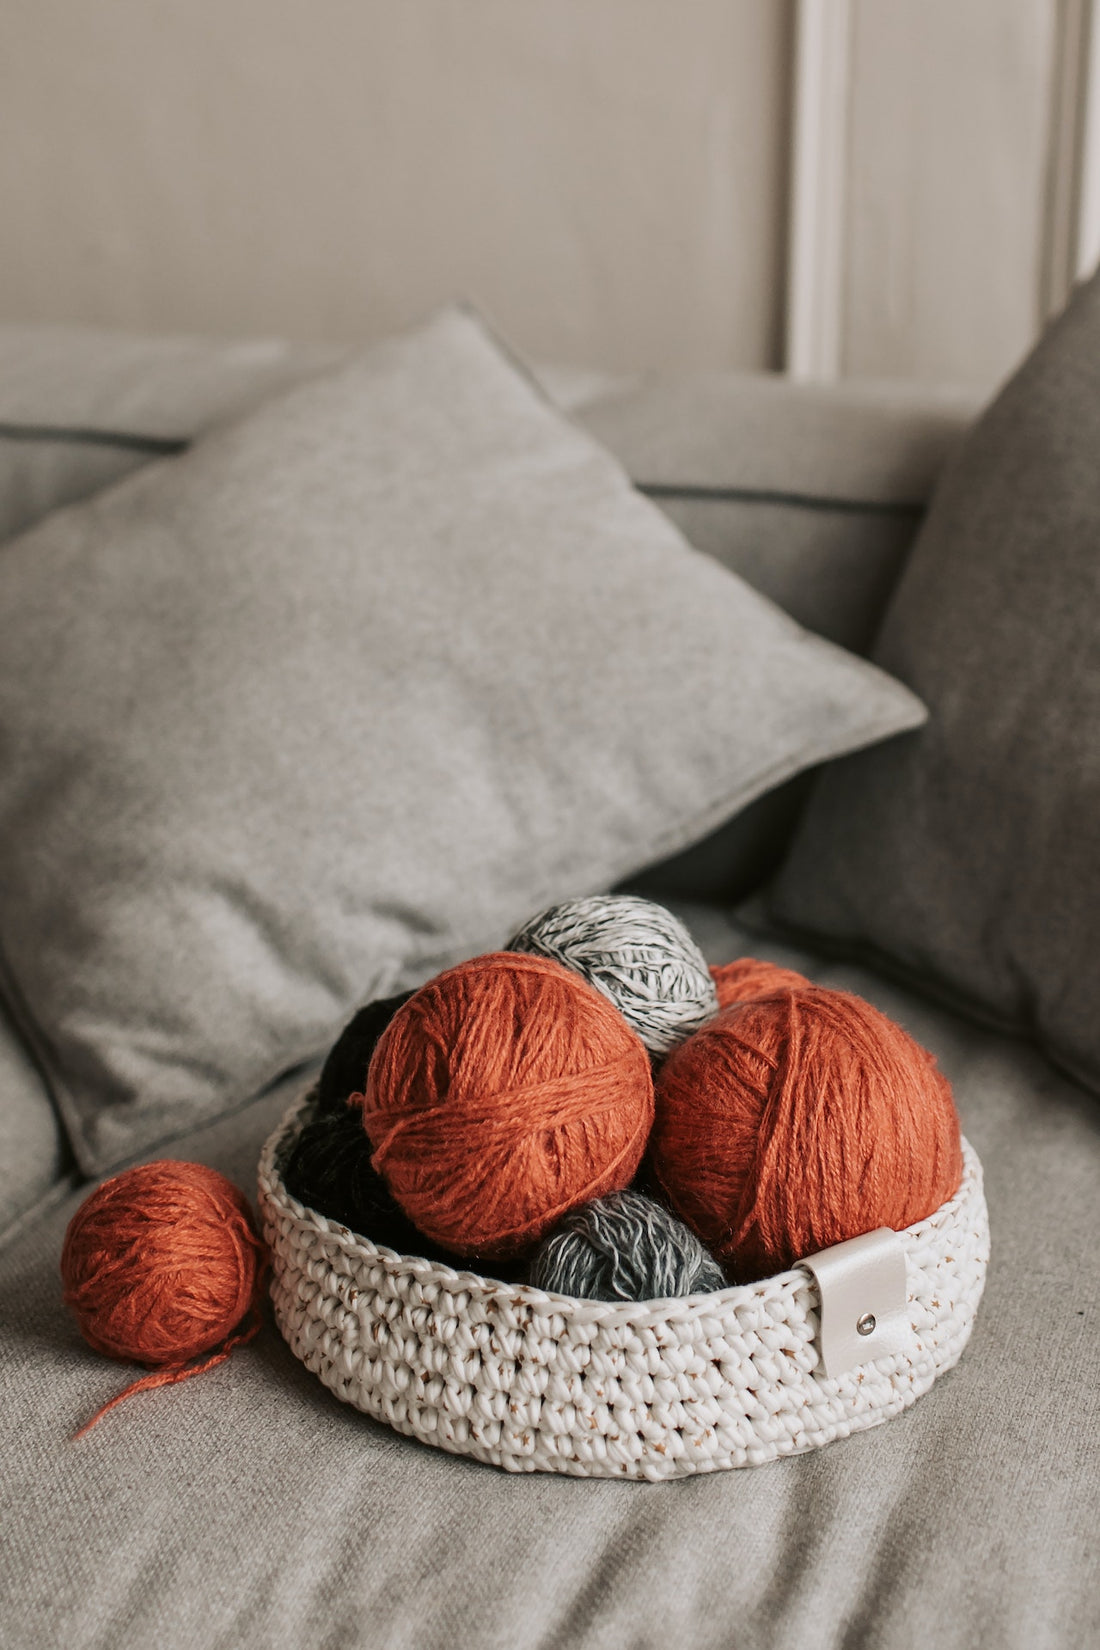 Knitting Colorwork: Tips and Tricks for Beautiful Stranded Designs